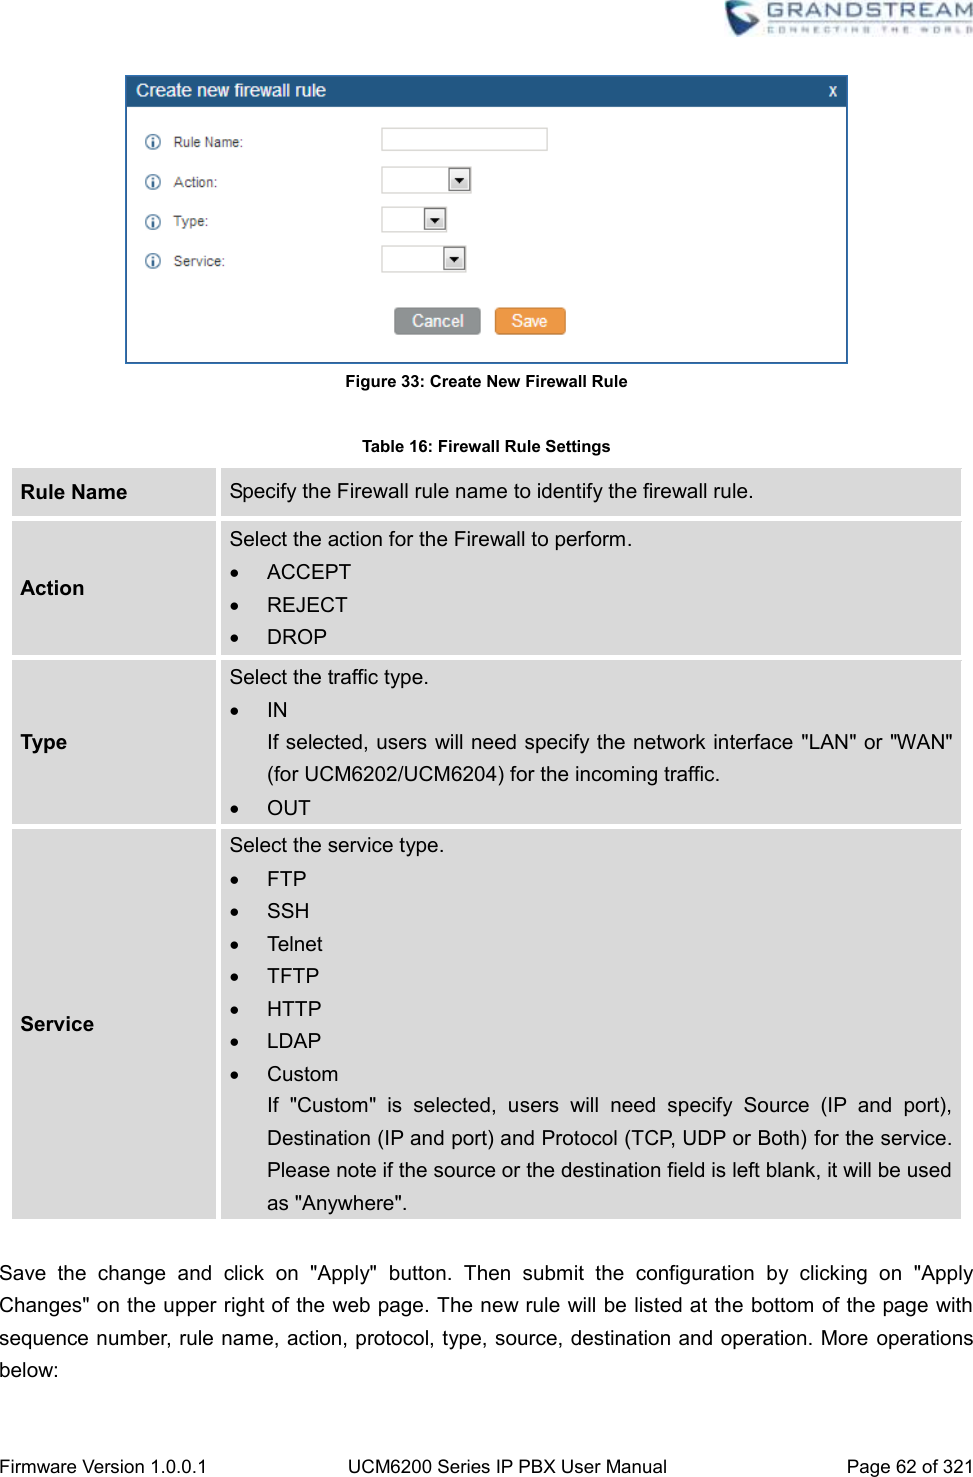  Firmware Version 1.0.0.1 UCM6200 Series IP PBX User Manual Page 62 of 321     Figure 33: Create New Firewall Rule  Table 16: Firewall Rule Settings Rule Name Specify the Firewall rule name to identify the firewall rule. Action Select the action for the Firewall to perform.   ACCEPT   REJECT   DROP Type Select the traffic type.  IN If selected, users will need specify the network interface &quot;LAN&quot; or &quot;WAN&quot; (for UCM6202/UCM6204) for the incoming traffic.   OUT Service Select the service type.   FTP  SSH   Telnet   TFTP   HTTP   LDAP   Custom If  &quot;Custom&quot;  is  selected,  users  will  need  specify  Source  (IP  and  port), Destination (IP and port) and Protocol (TCP, UDP or Both) for the service. Please note if the source or the destination field is left blank, it will be used as &quot;Anywhere&quot;.  Save  the  change  and  click  on  &quot;Apply&quot;  button.  Then  submit  the  configuration  by  clicking  on  &quot;Apply Changes&quot; on the upper right of the web page. The new rule will be listed at the bottom of the page with sequence number, rule name, action, protocol, type, source, destination and operation. More  operations below: 